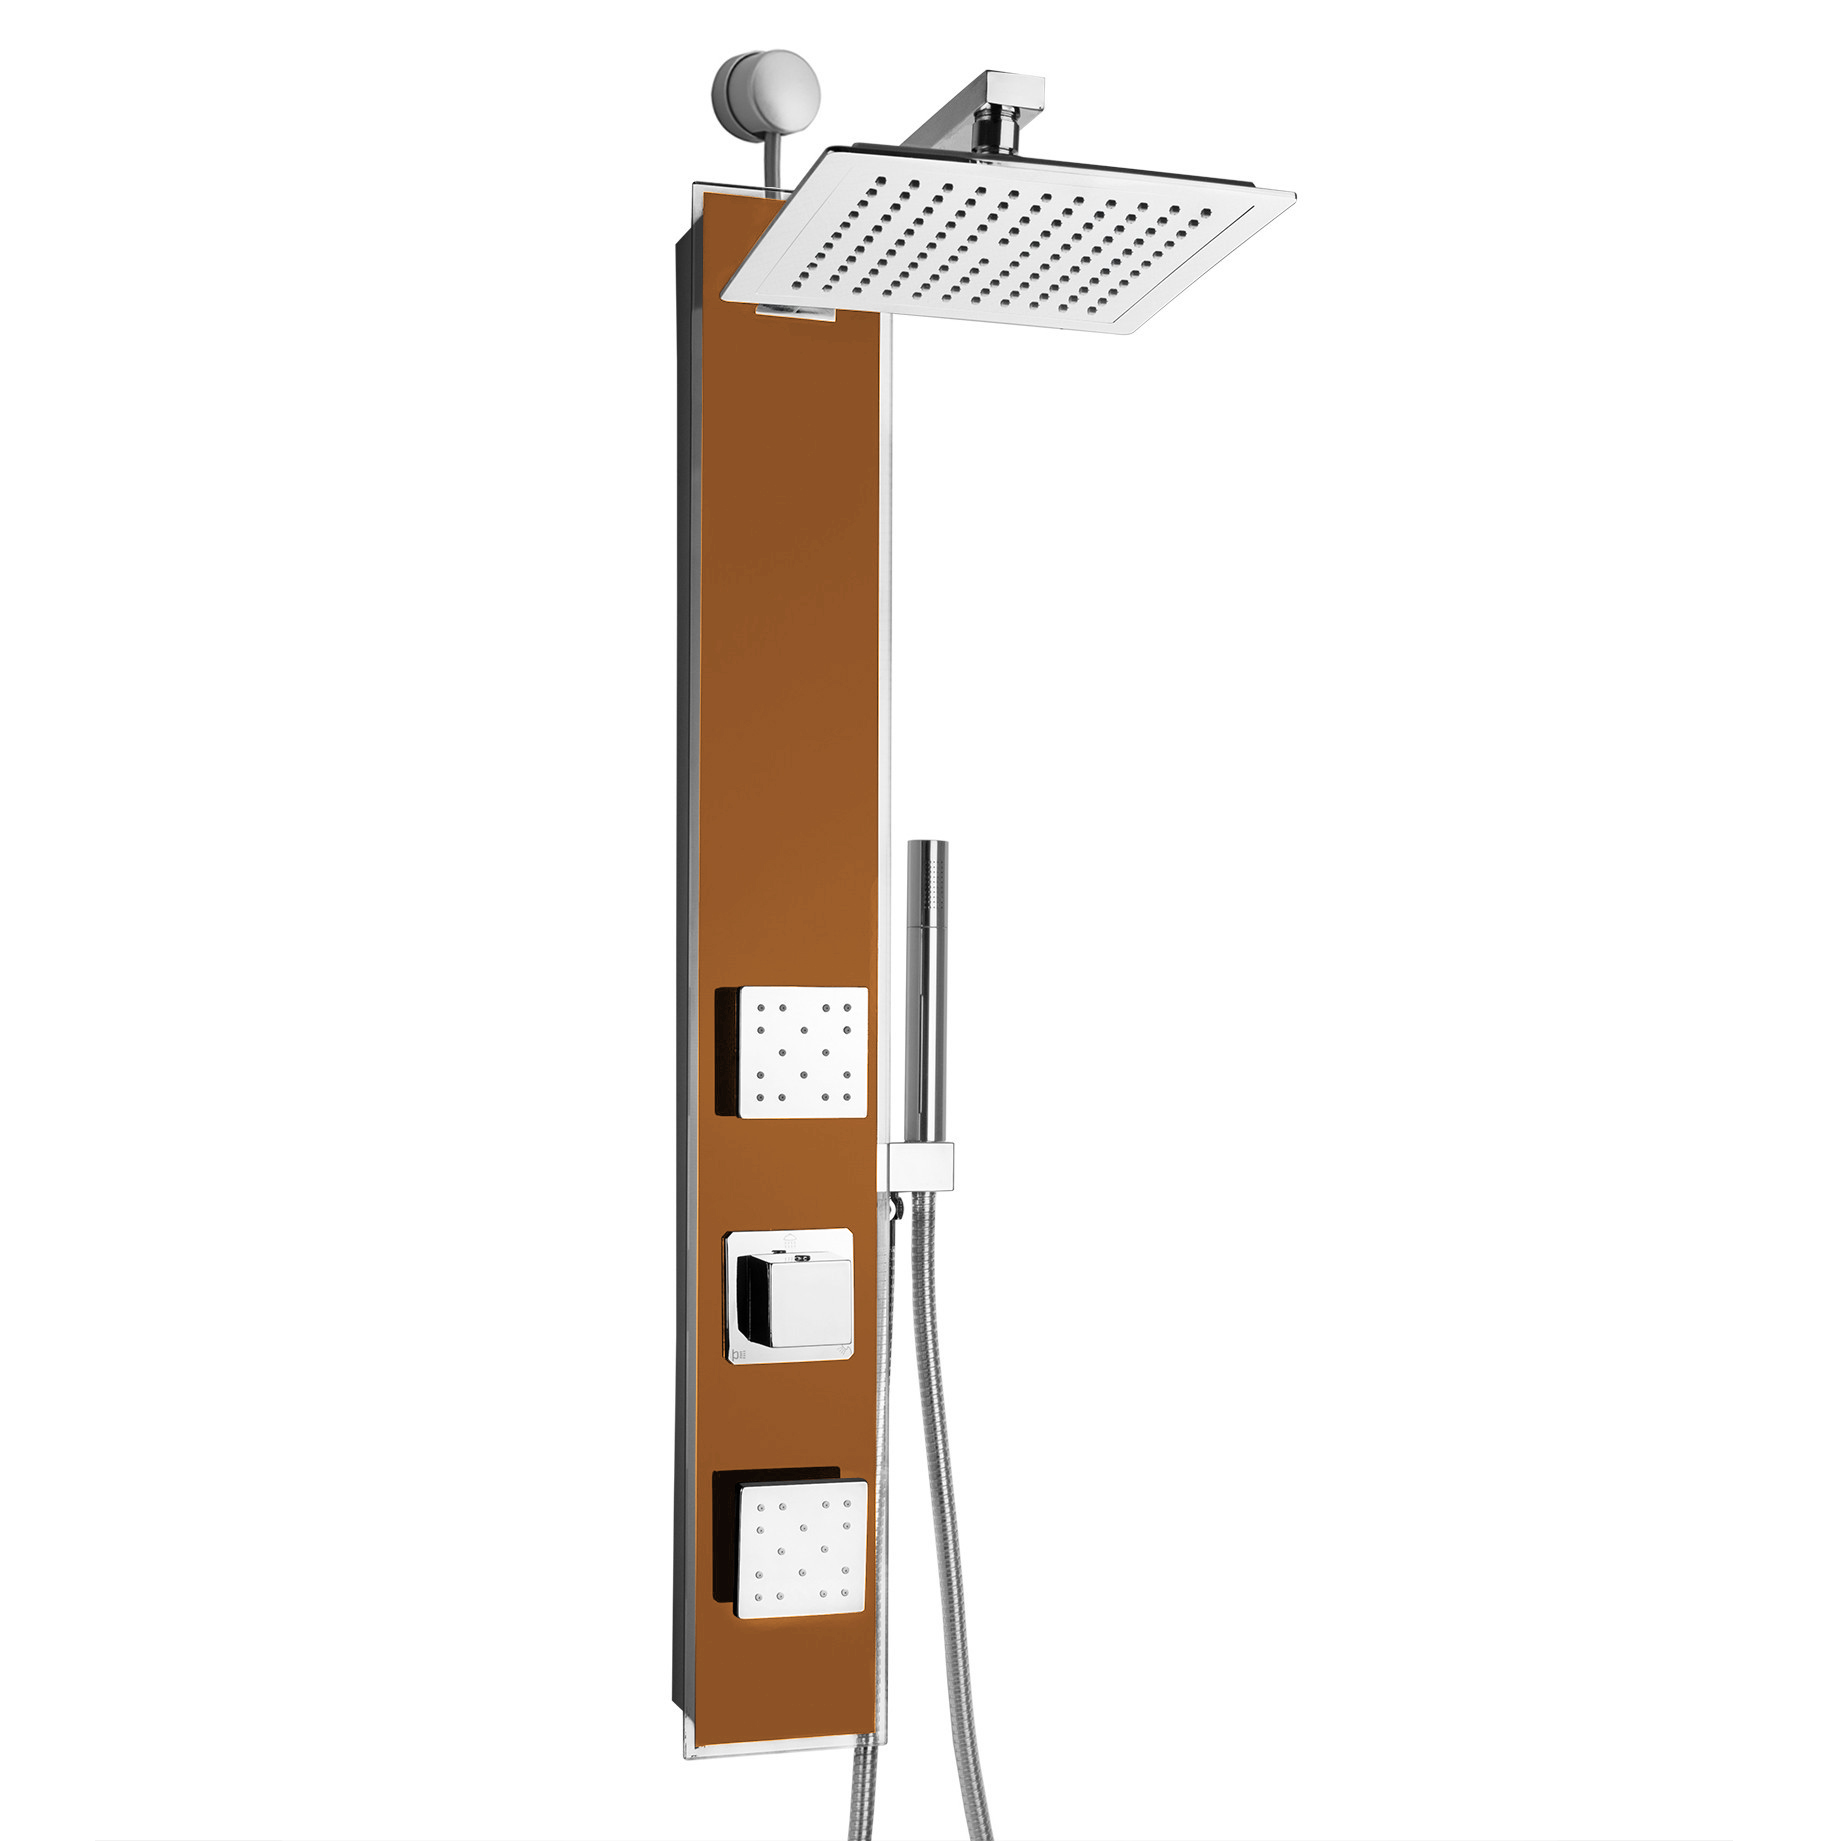 Taranto Tempered Glass Rainfall Shower Panel Tower System with Body Shower Jet & Hand Shower